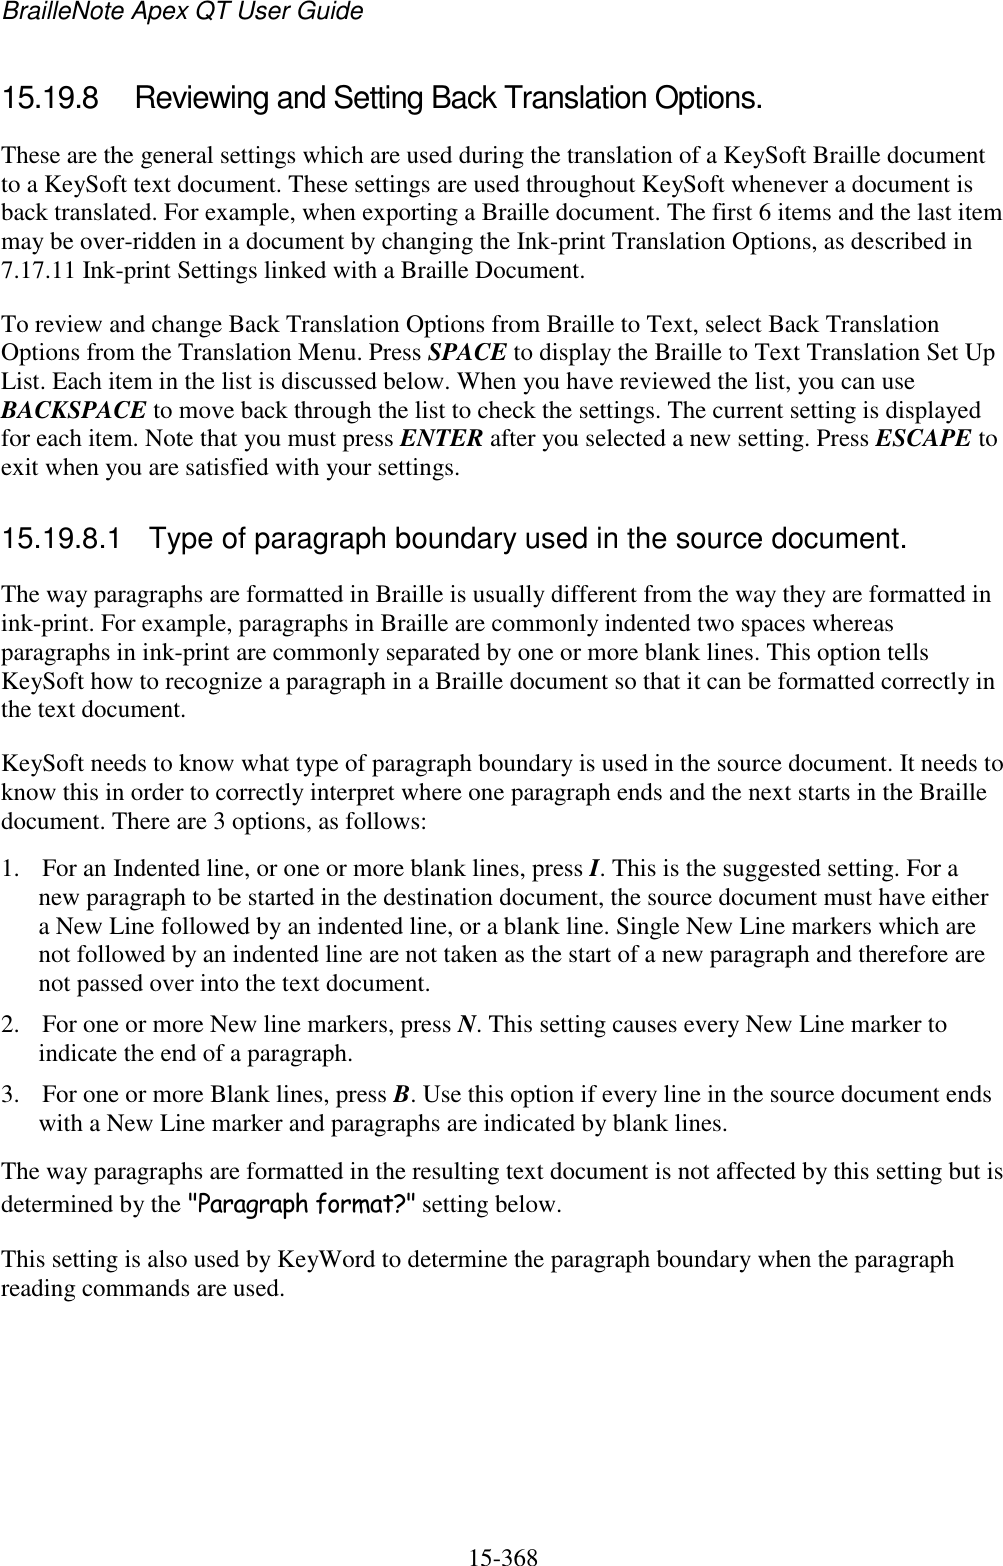 BrailleNote Apex QT User Guide  15-368   15.19.8  Reviewing and Setting Back Translation Options. These are the general settings which are used during the translation of a KeySoft Braille document to a KeySoft text document. These settings are used throughout KeySoft whenever a document is back translated. For example, when exporting a Braille document. The first 6 items and the last item may be over-ridden in a document by changing the Ink-print Translation Options, as described in 7.17.11 Ink-print Settings linked with a Braille Document. To review and change Back Translation Options from Braille to Text, select Back Translation Options from the Translation Menu. Press SPACE to display the Braille to Text Translation Set Up List. Each item in the list is discussed below. When you have reviewed the list, you can use BACKSPACE to move back through the list to check the settings. The current setting is displayed for each item. Note that you must press ENTER after you selected a new setting. Press ESCAPE to exit when you are satisfied with your settings.  15.19.8.1  Type of paragraph boundary used in the source document. The way paragraphs are formatted in Braille is usually different from the way they are formatted in ink-print. For example, paragraphs in Braille are commonly indented two spaces whereas paragraphs in ink-print are commonly separated by one or more blank lines. This option tells KeySoft how to recognize a paragraph in a Braille document so that it can be formatted correctly in the text document. KeySoft needs to know what type of paragraph boundary is used in the source document. It needs to know this in order to correctly interpret where one paragraph ends and the next starts in the Braille document. There are 3 options, as follows: 1. For an Indented line, or one or more blank lines, press I. This is the suggested setting. For a new paragraph to be started in the destination document, the source document must have either a New Line followed by an indented line, or a blank line. Single New Line markers which are not followed by an indented line are not taken as the start of a new paragraph and therefore are not passed over into the text document. 2. For one or more New line markers, press N. This setting causes every New Line marker to indicate the end of a paragraph. 3. For one or more Blank lines, press B. Use this option if every line in the source document ends with a New Line marker and paragraphs are indicated by blank lines. The way paragraphs are formatted in the resulting text document is not affected by this setting but is determined by the &quot;Paragraph format?&quot; setting below. This setting is also used by KeyWord to determine the paragraph boundary when the paragraph reading commands are used.  